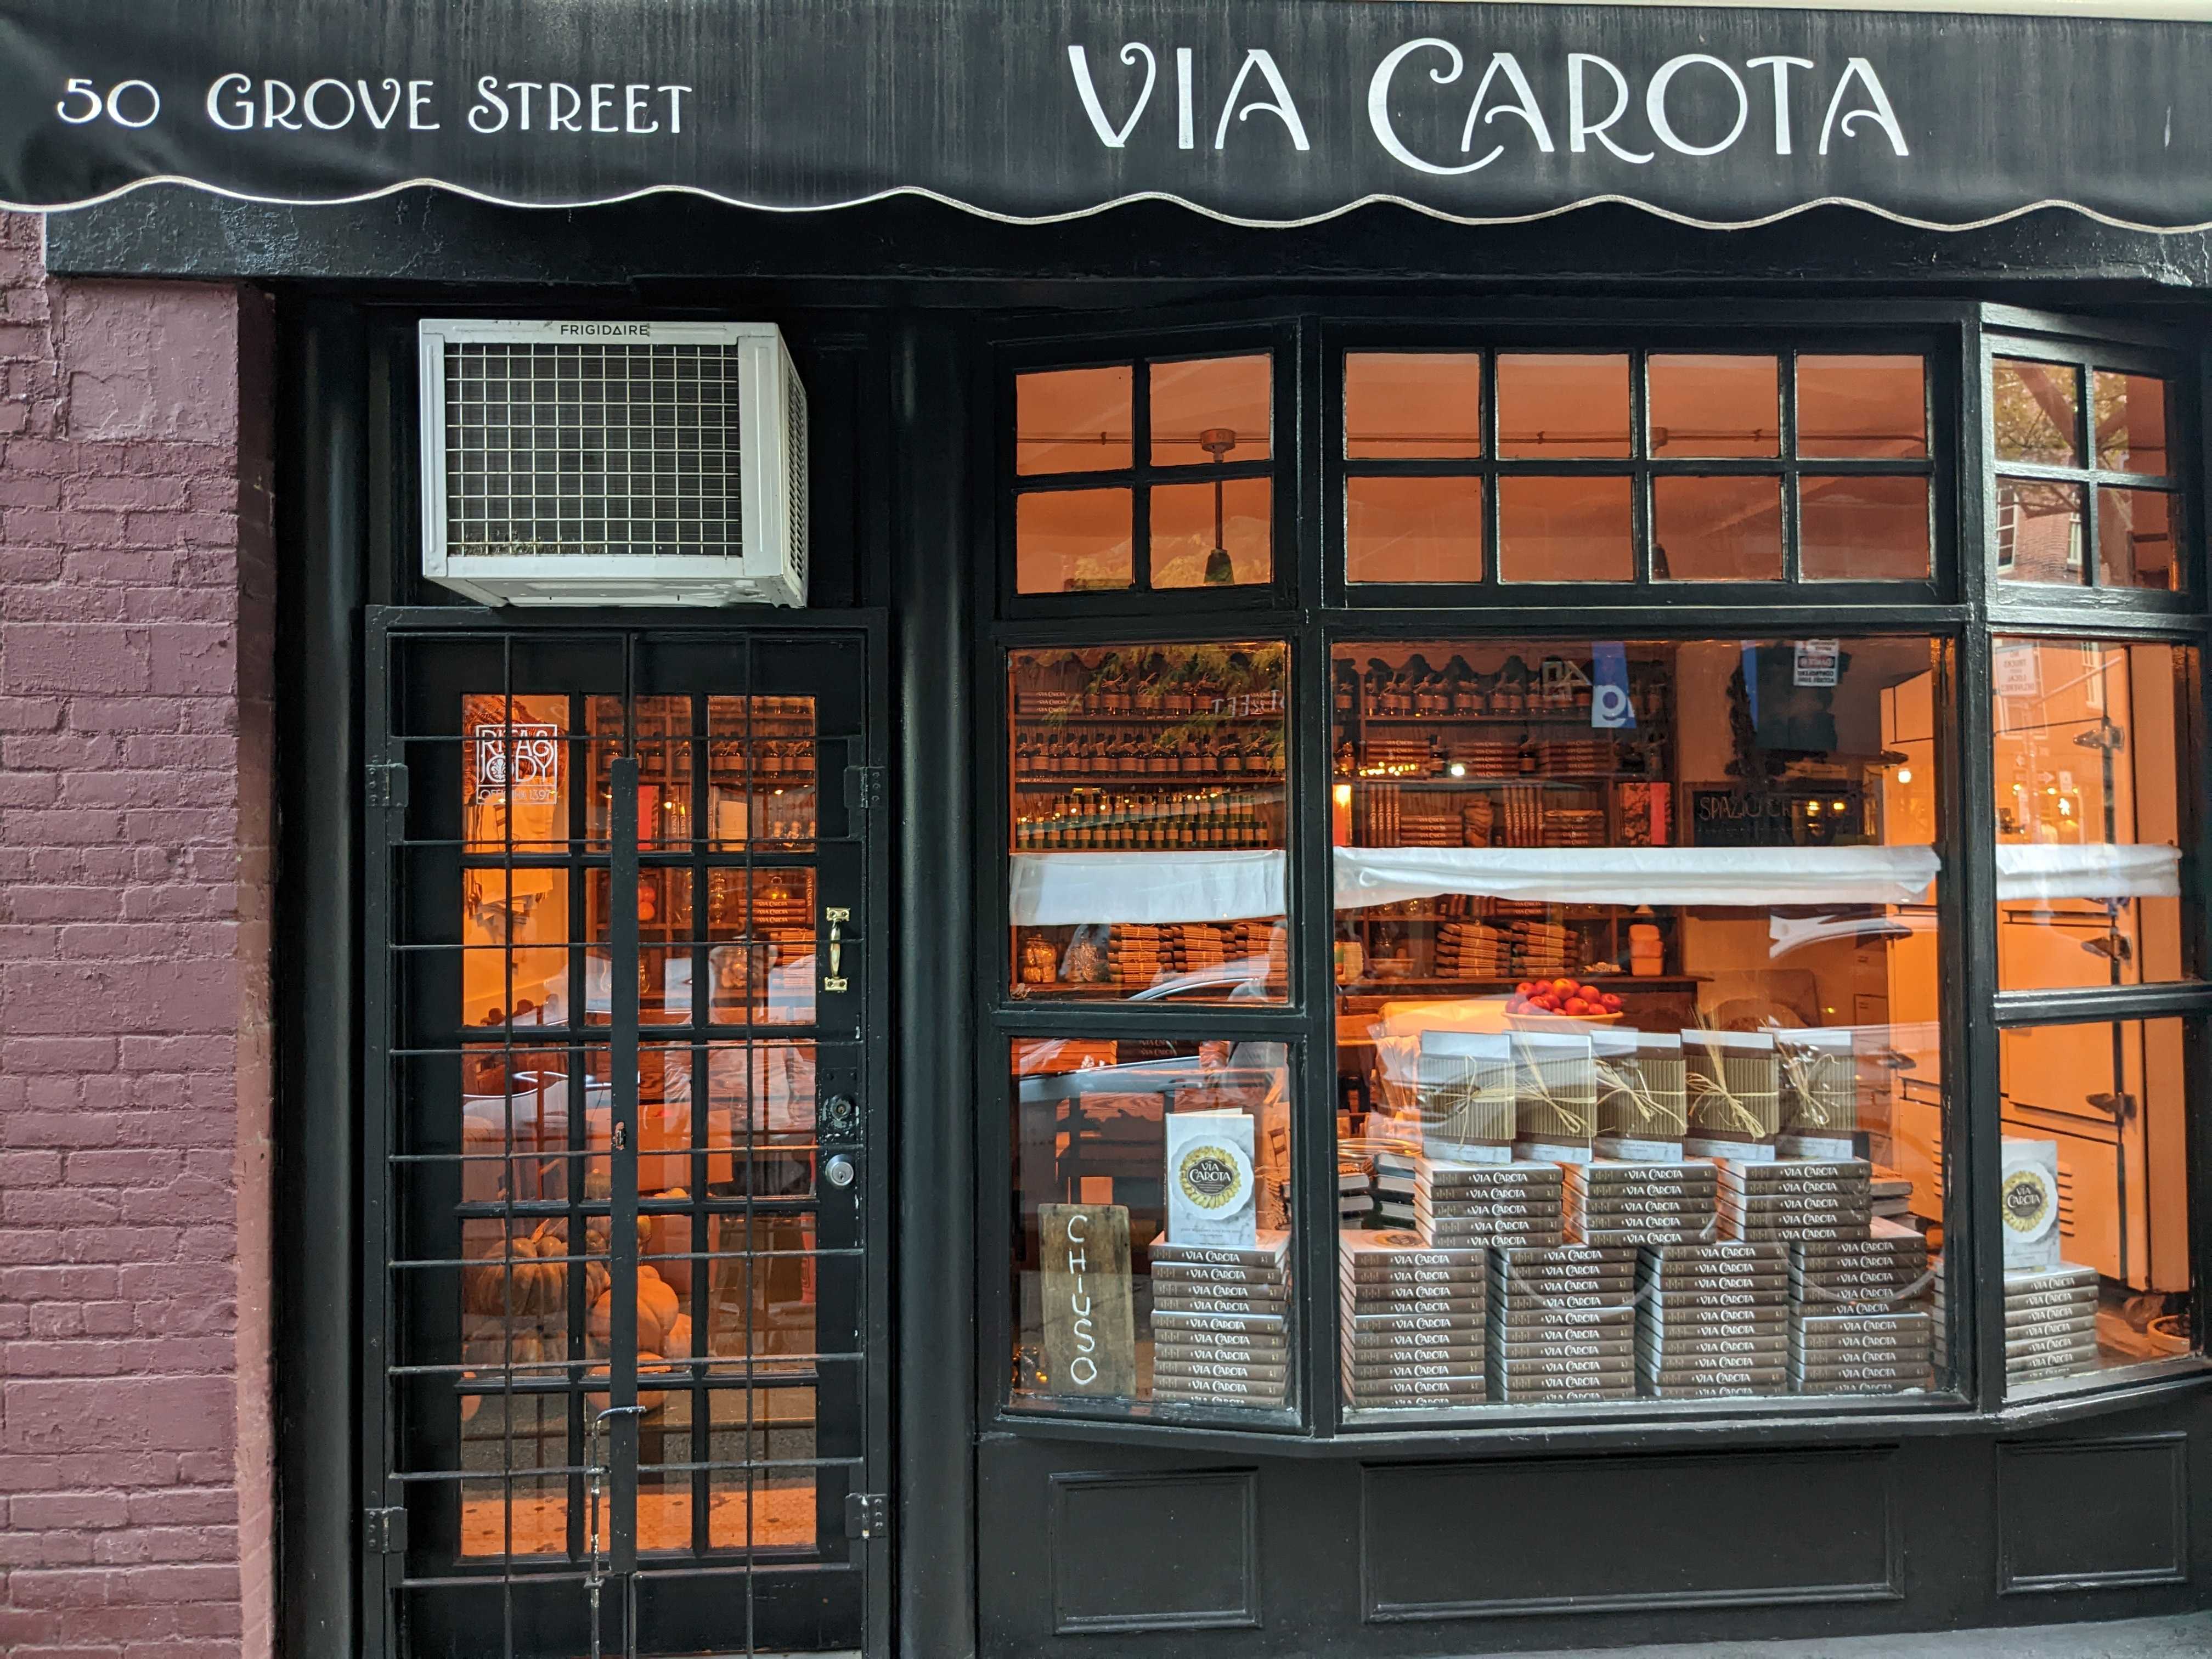 A storefront with Via Carota’s name with is displayed with the address 50 Grove Street.